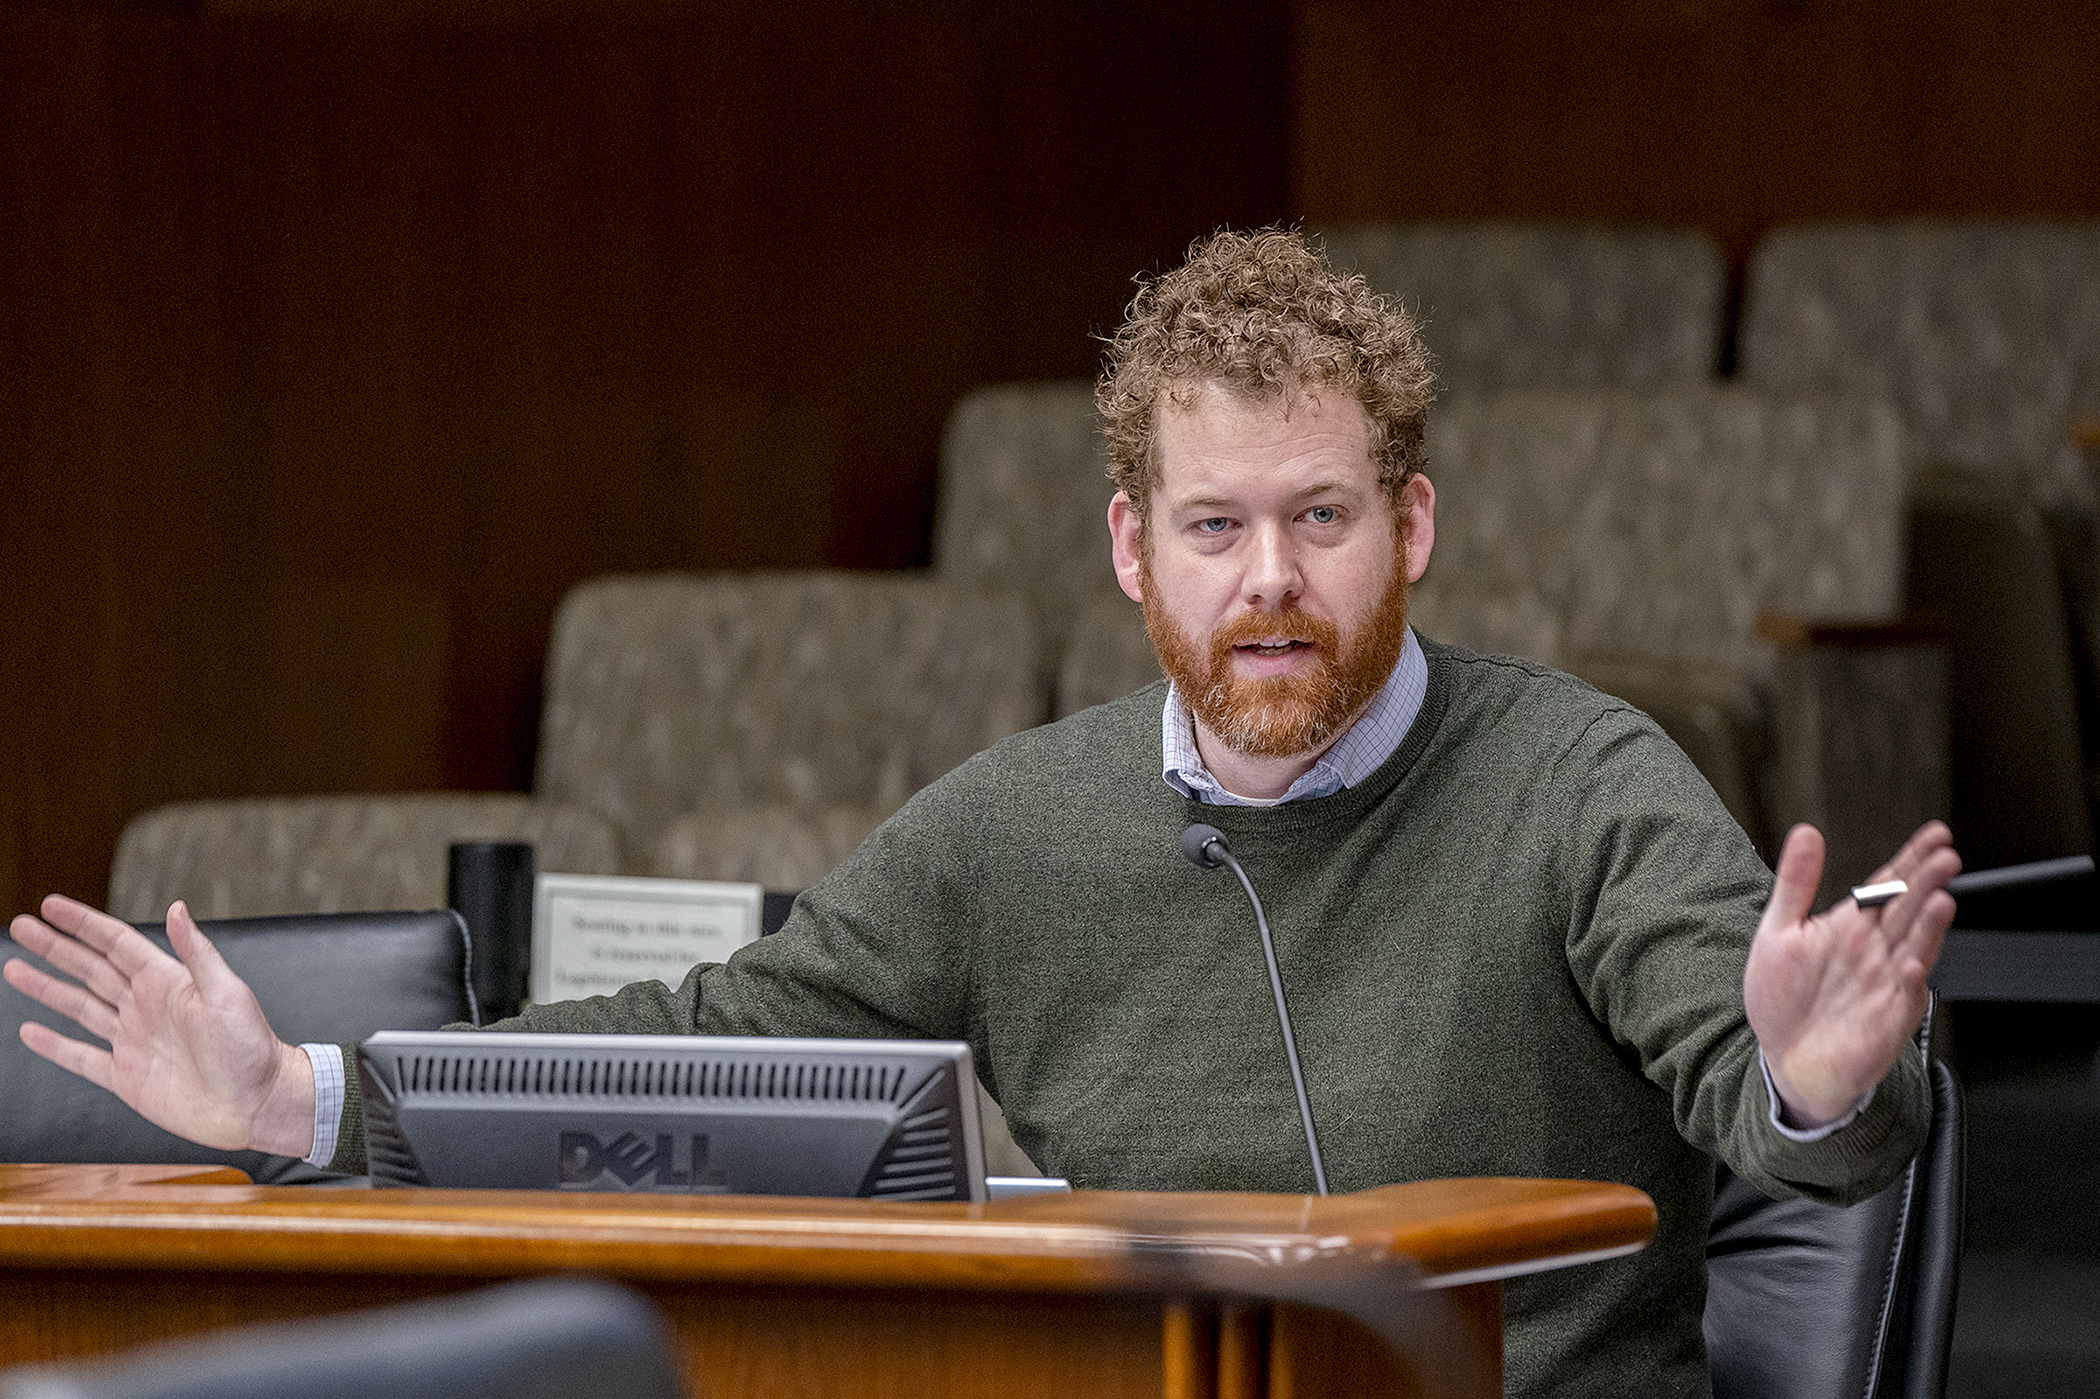 Rep. Zack Stephenson presents HF3488, a bill that would address compensation for minors appearing in Internet content, to the House Judiciary Finance and Civil Law Committee Feb. 15. (Photo by Michele Jokinen)